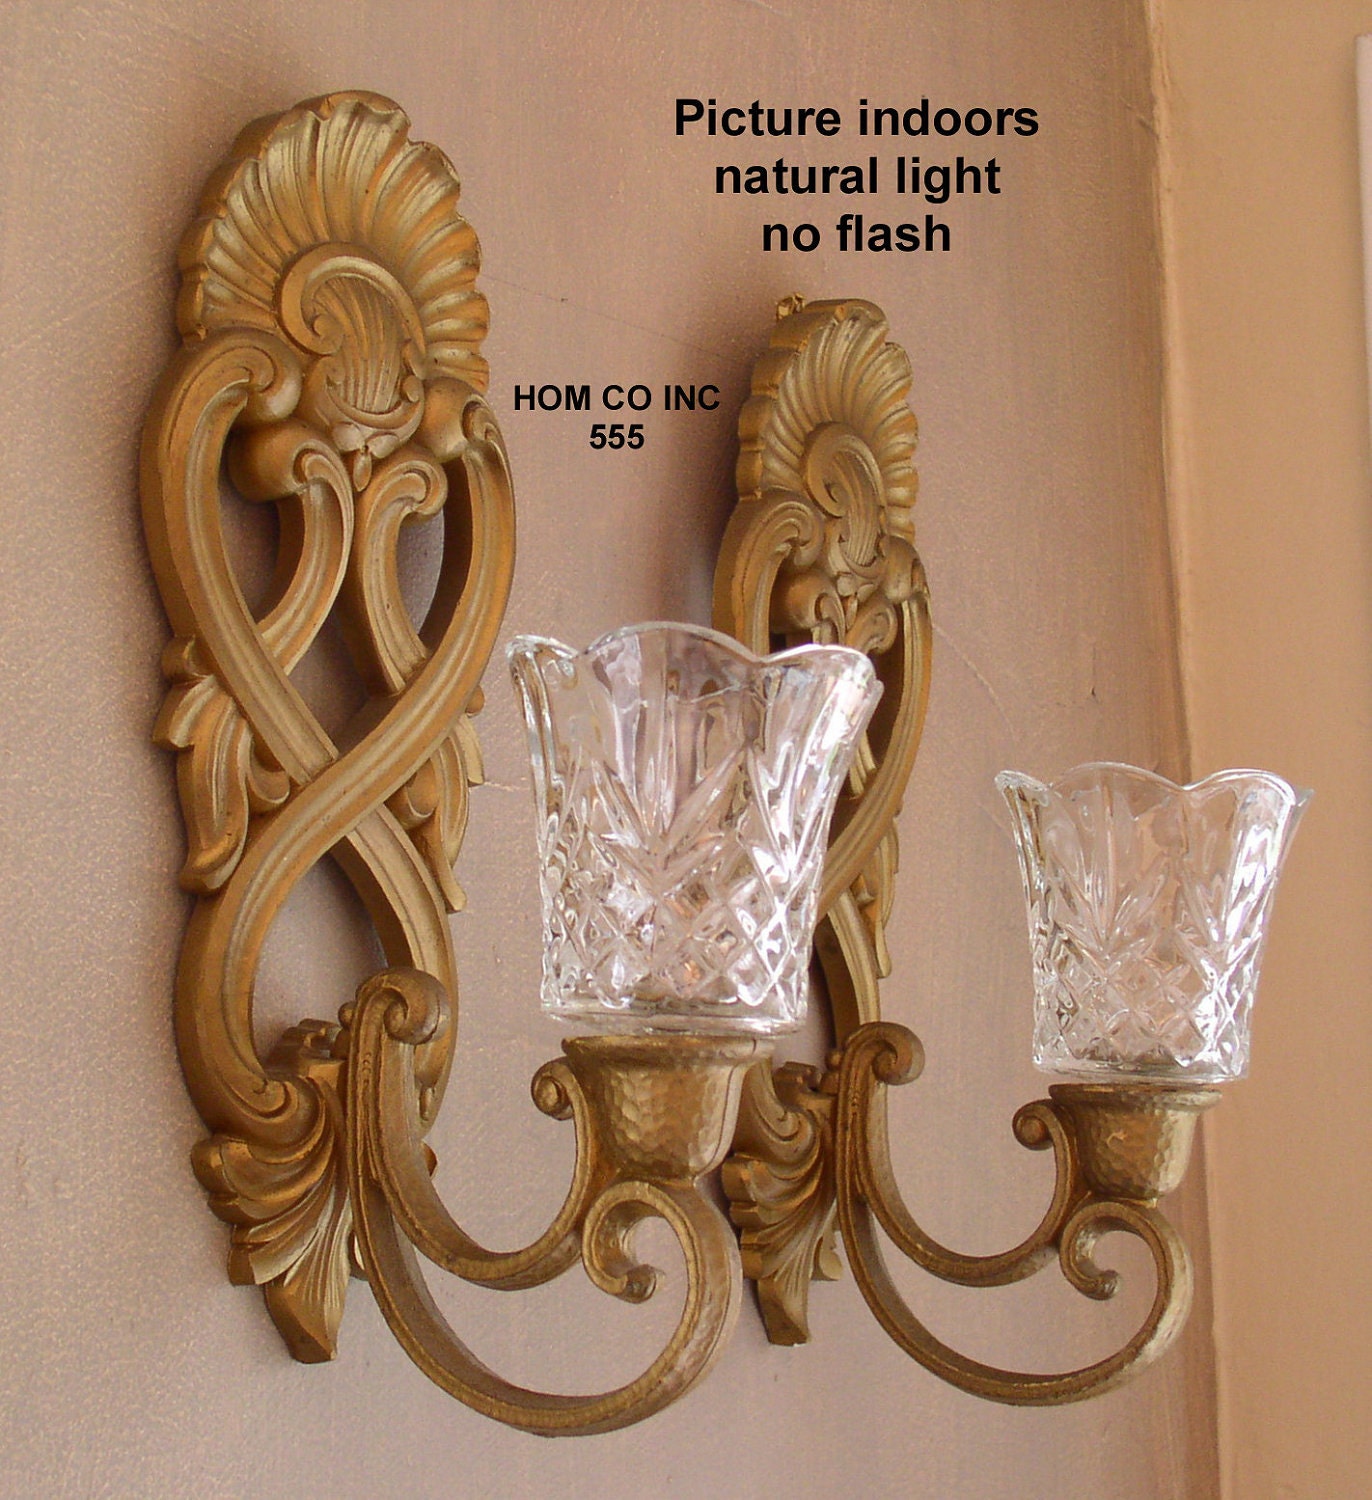 Vintage Scroll Wall Sconce Candle Holder with Glass by duckpod